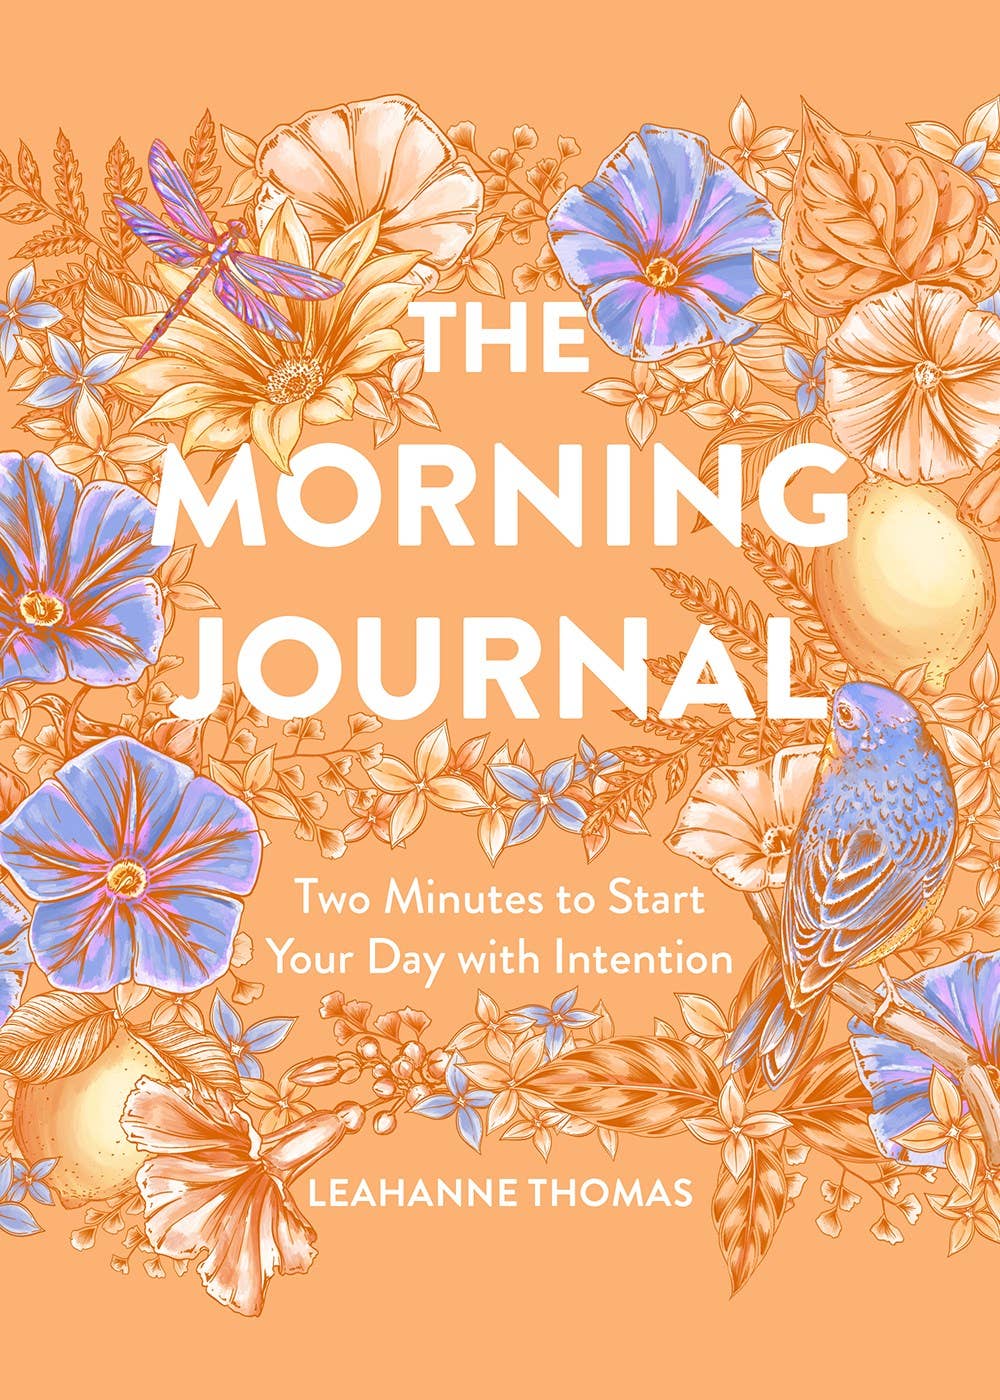 Morning Journal by Leahanne Thomas